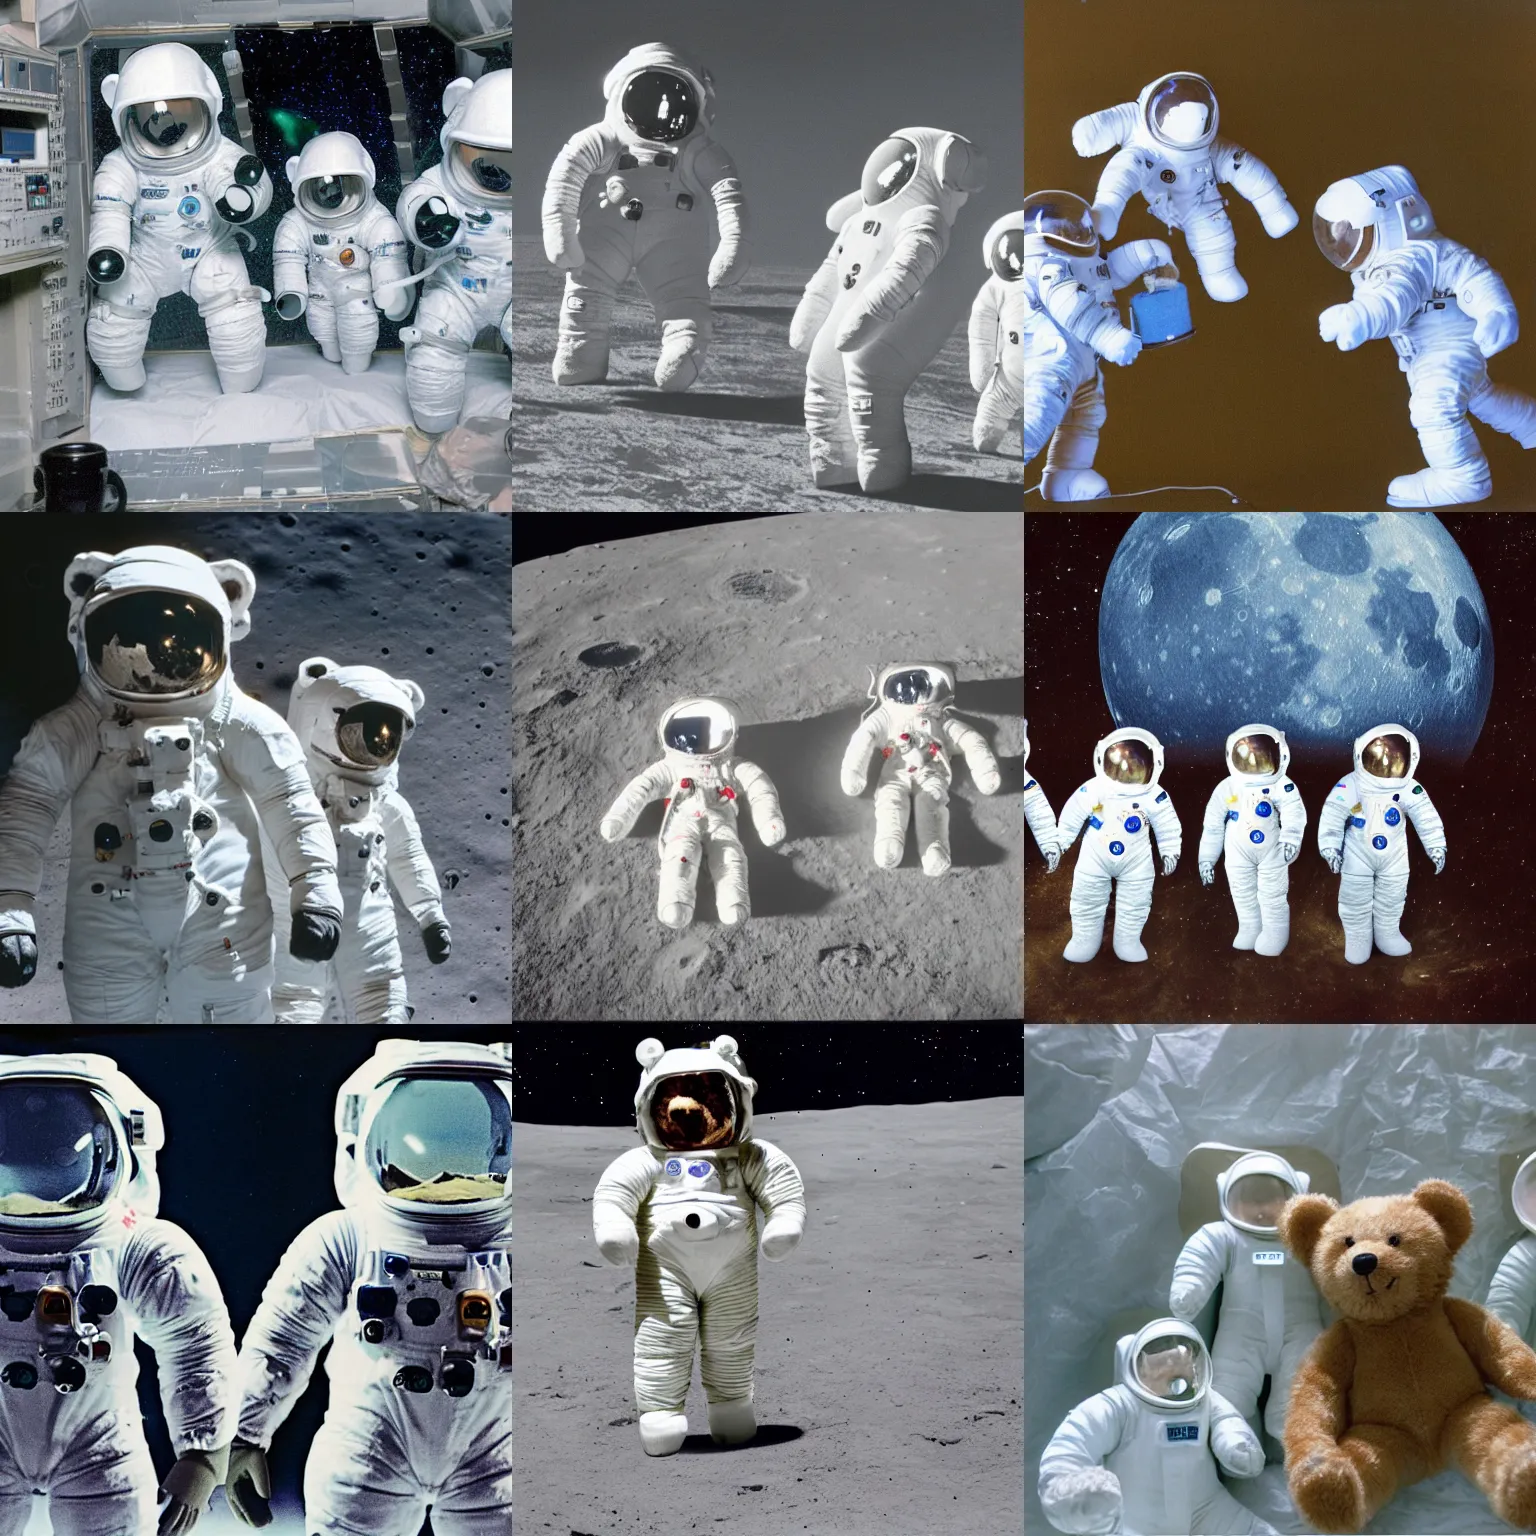 Prompt: a high quality photograph of teddy bears wearing translucent space suits working on new ai research on the moon in the 1 9 8 0 s. detailed and clean